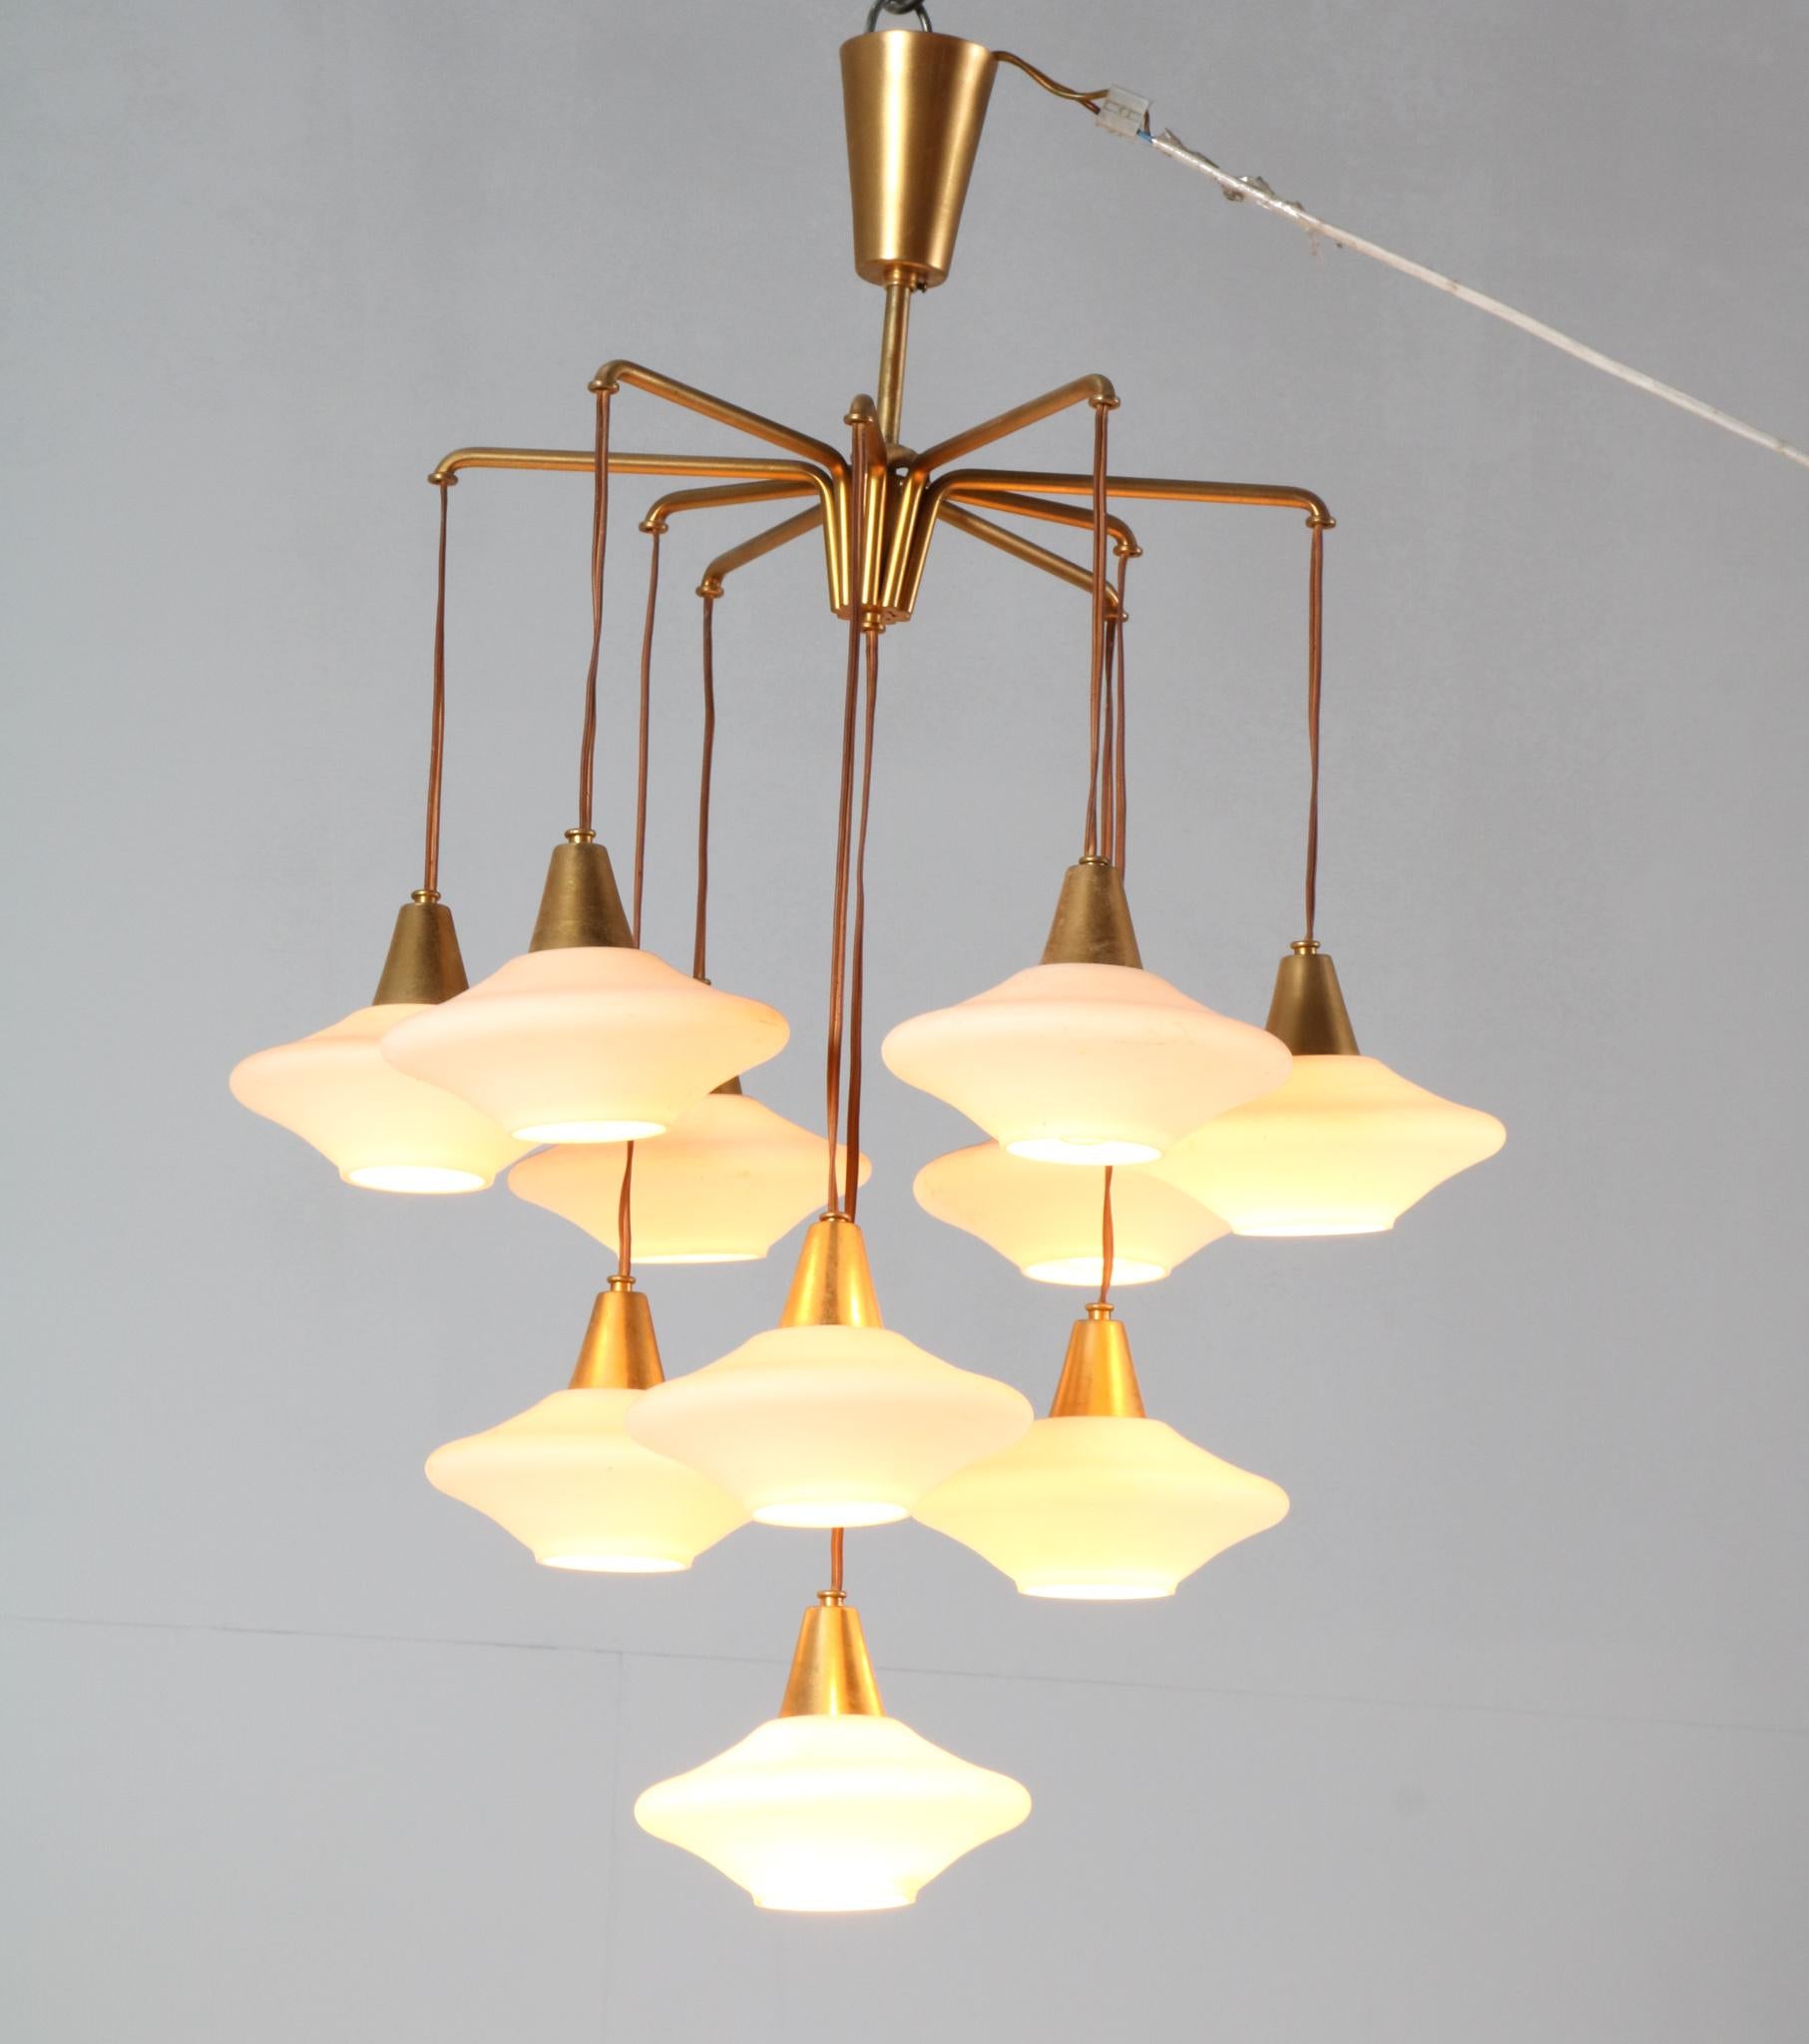 Amazing and rare Mid-Century Modern chandelier or pendant light.
Striking Italian design from the 1960s.
Gilt brass frame with ten original milk glass shades.
Rewired with ten original sockets for E-27 light bulbs.
This wonderful Mid-Century